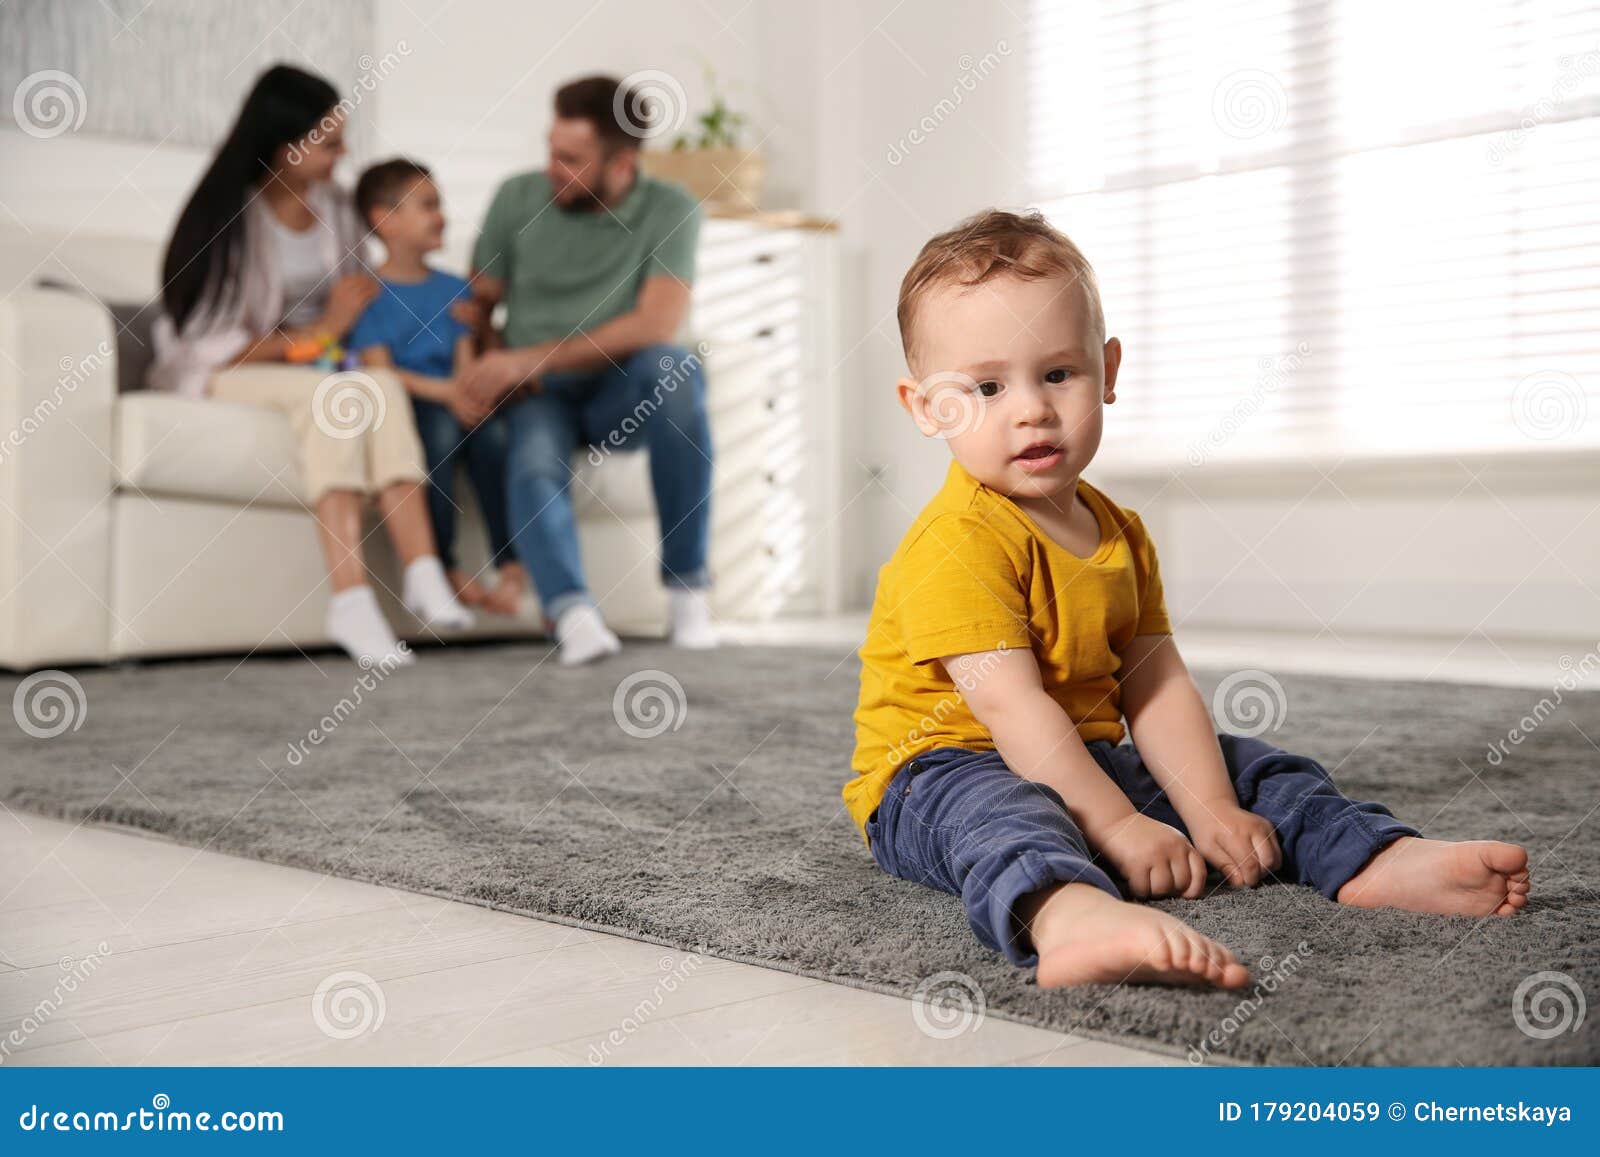 Babies: Baby Is Sitting Alone - Stock Picture I2041693 at 